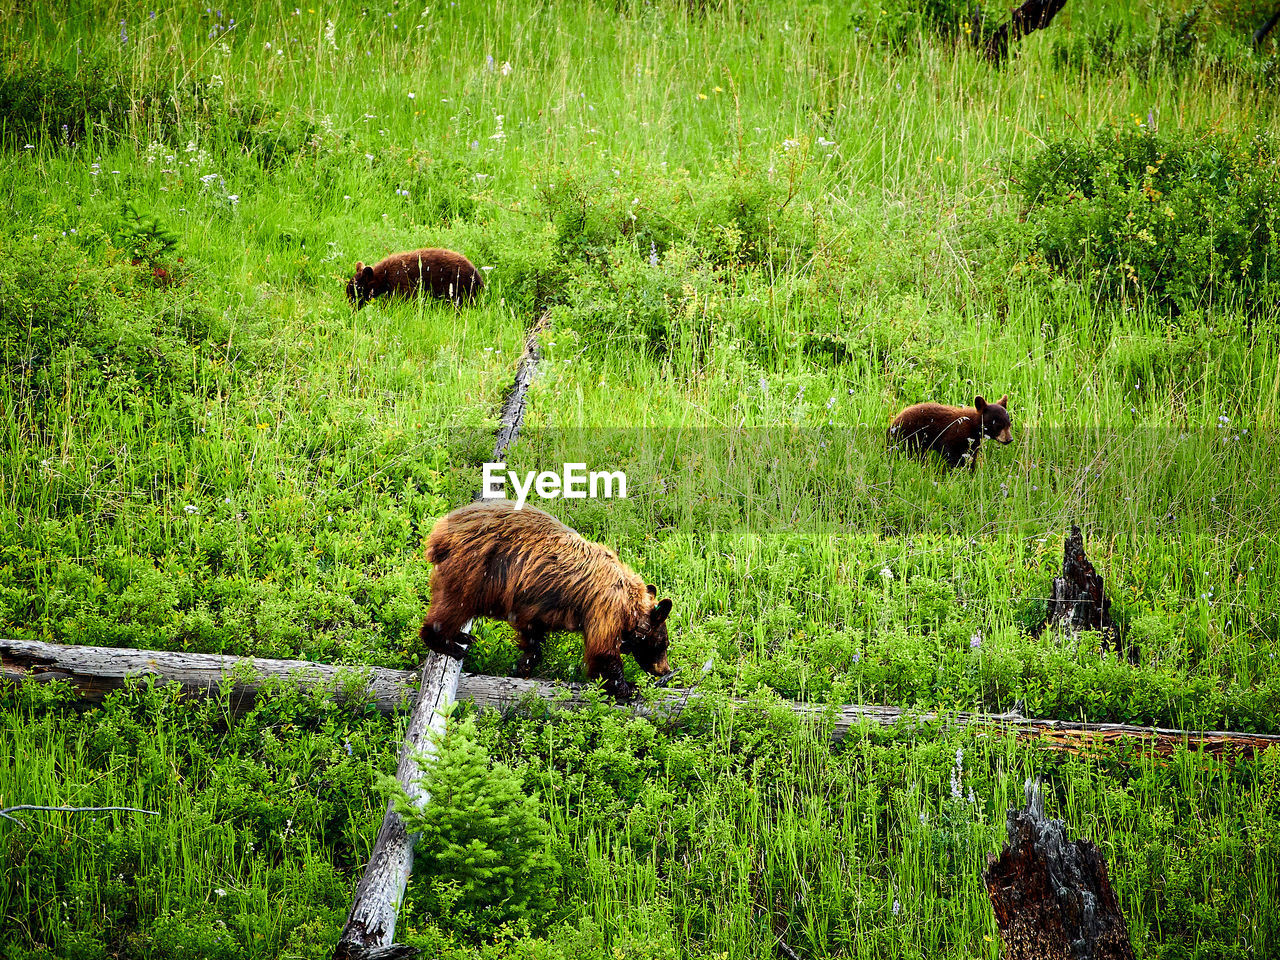 Female bear with cubs foraging of food at yellowstone national park.